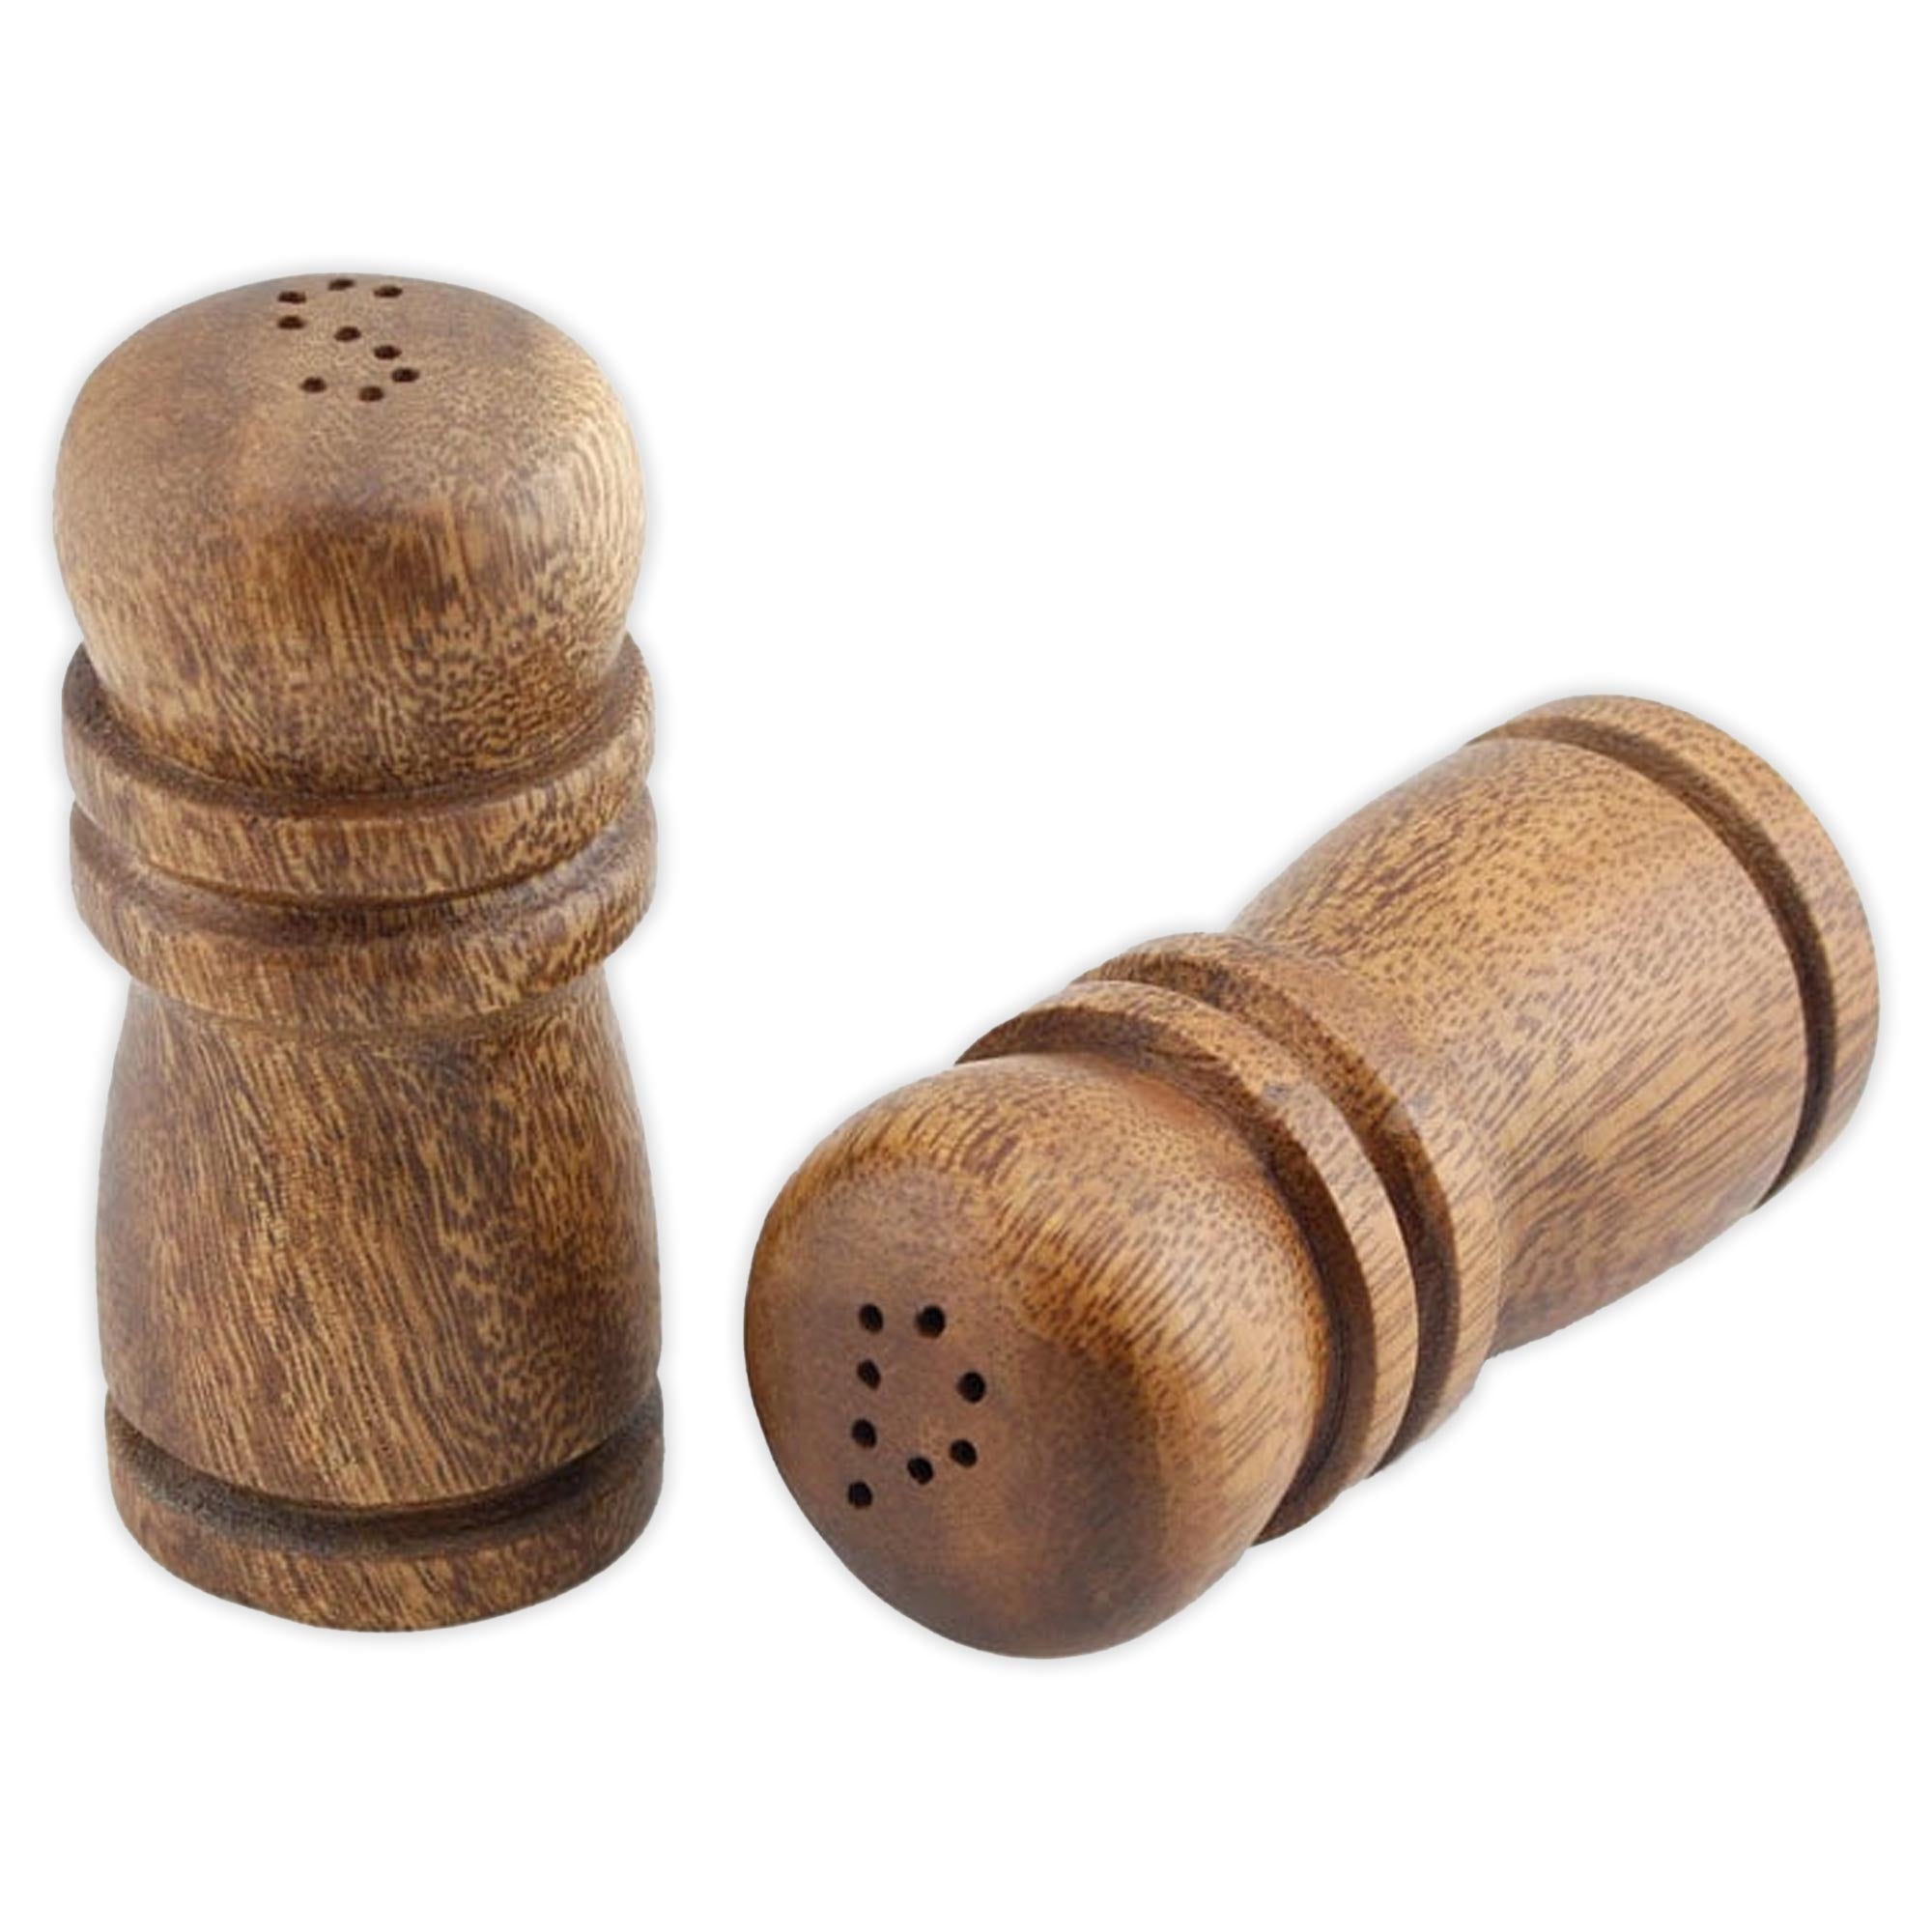 Funny Salt and Pepper Shakers - The Flavor Dance